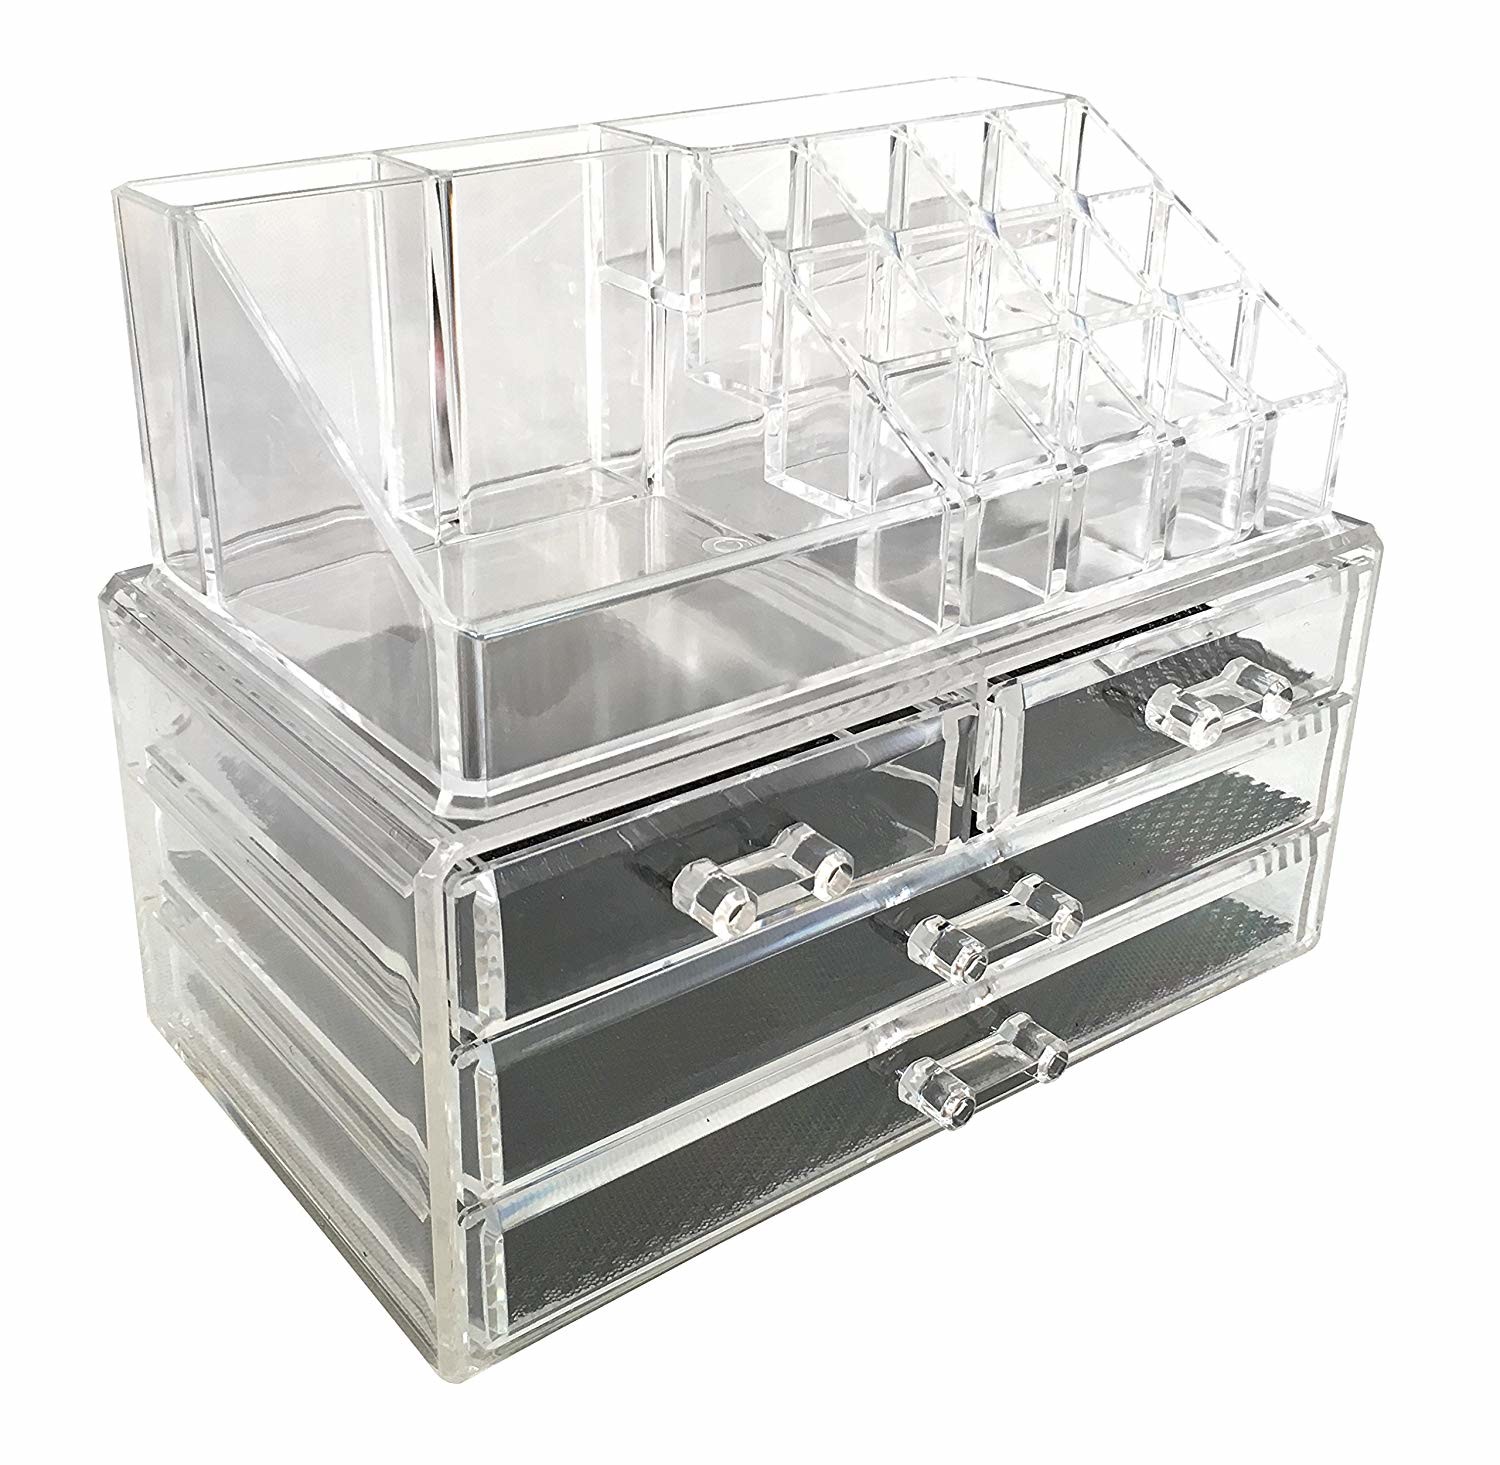 Quality 4 Tier Clear Acrylic Makeup Organizer Drawers Removable With Lipstick Holder for sale